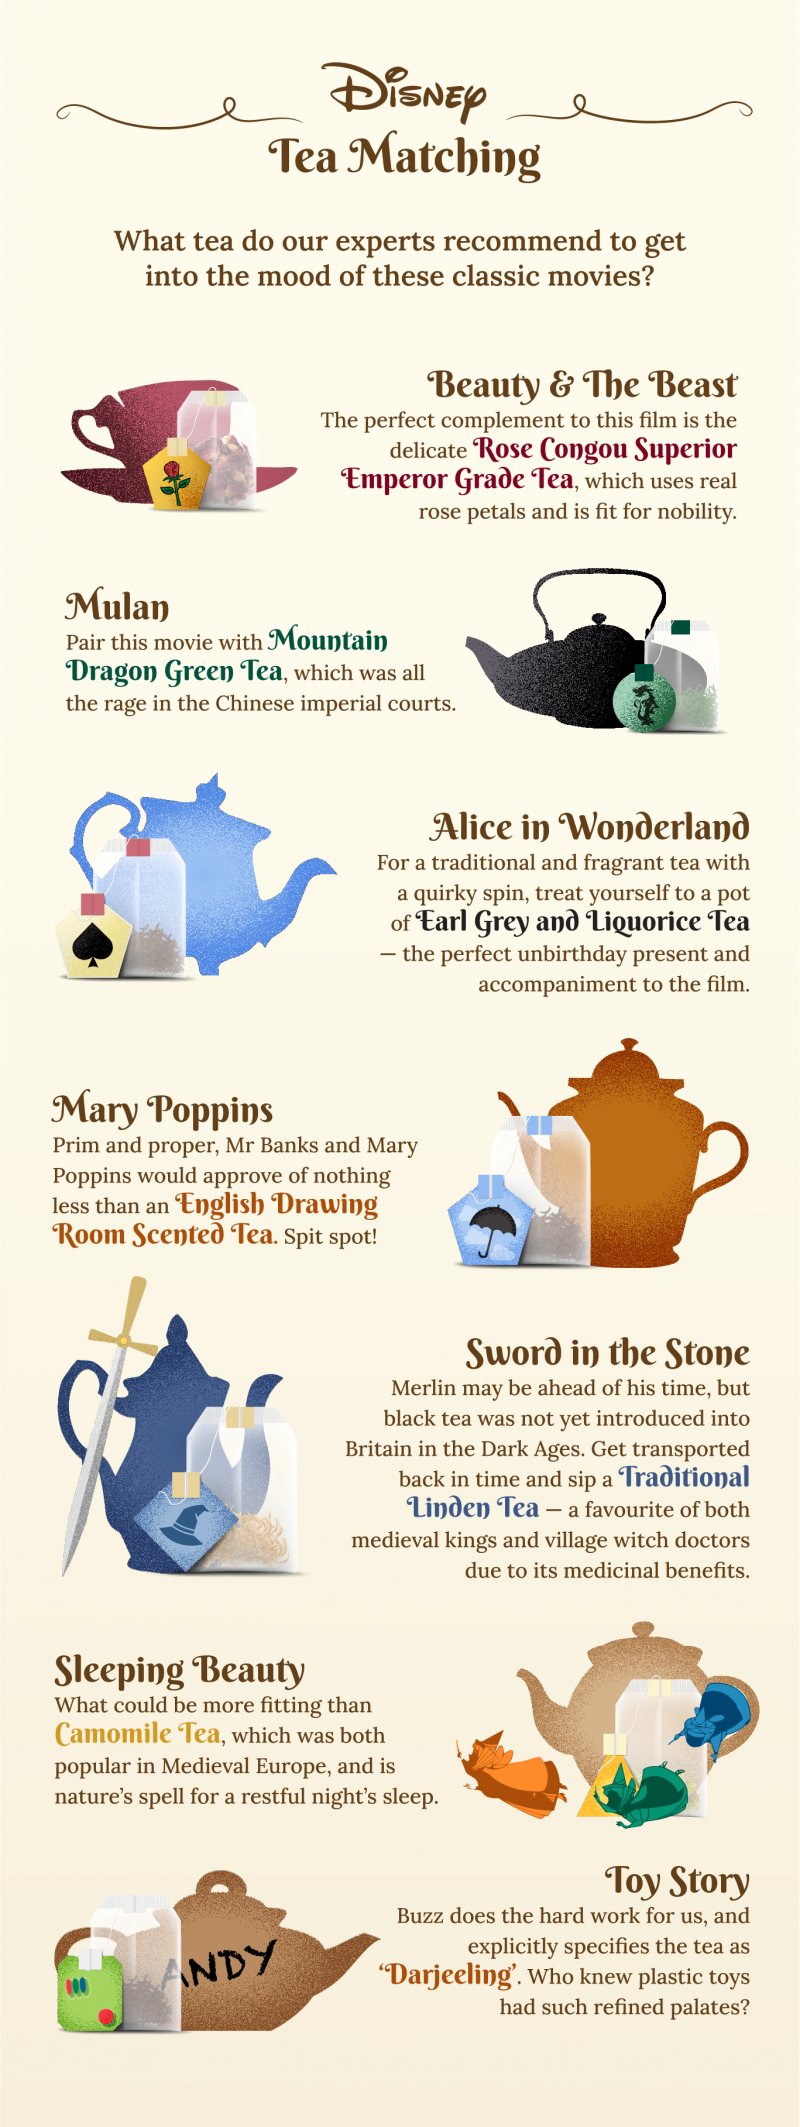 Disney is 'mad about tea' - Tea & Coffee Trade Journal